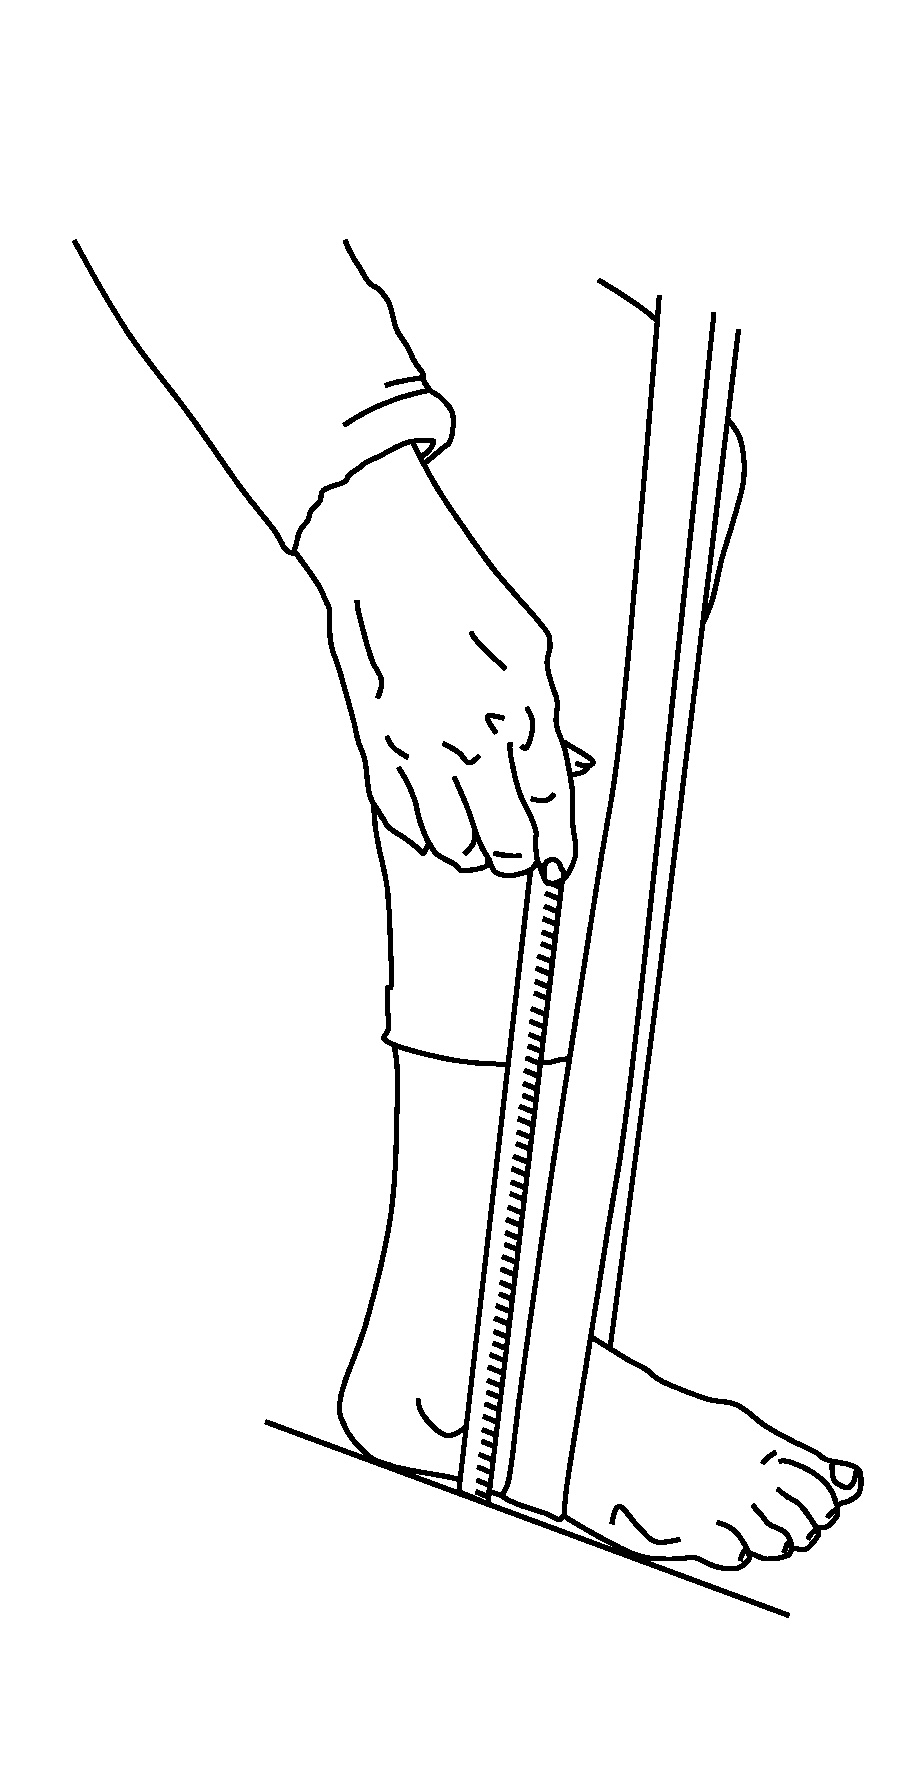 Methods and systems for sizing an orthotic device